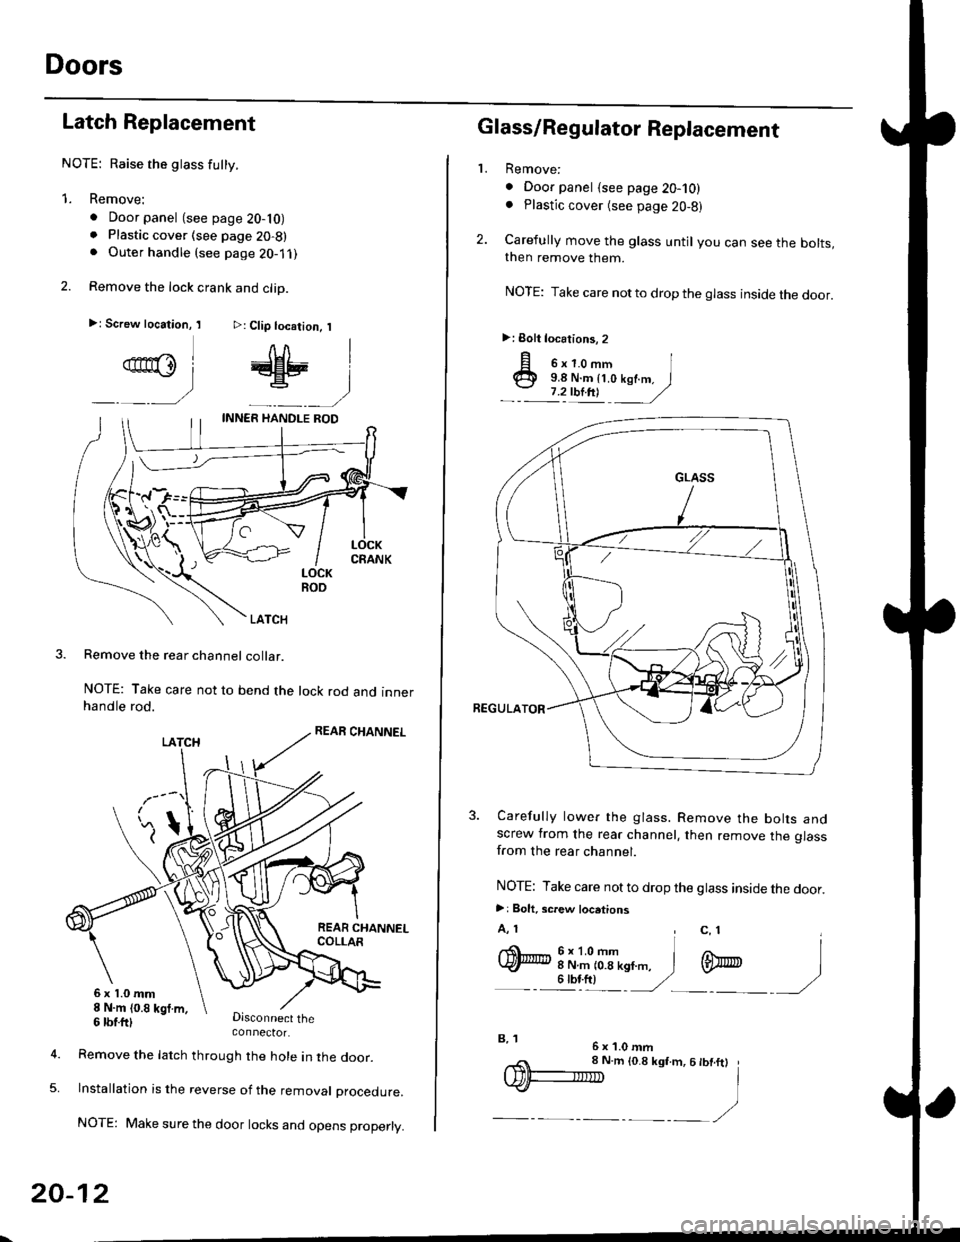 HONDA CIVIC 2000 6.G Workshop Manual Doors
Latch Replacement
NOTE: Raise the glass futty.
1. Remove:
. Door panel (see page 20-10). Plastic cover (see page 20-8). Outer handle (see page 2O-1 ,l
2. Remove the lock crank and clip.
>: Screw